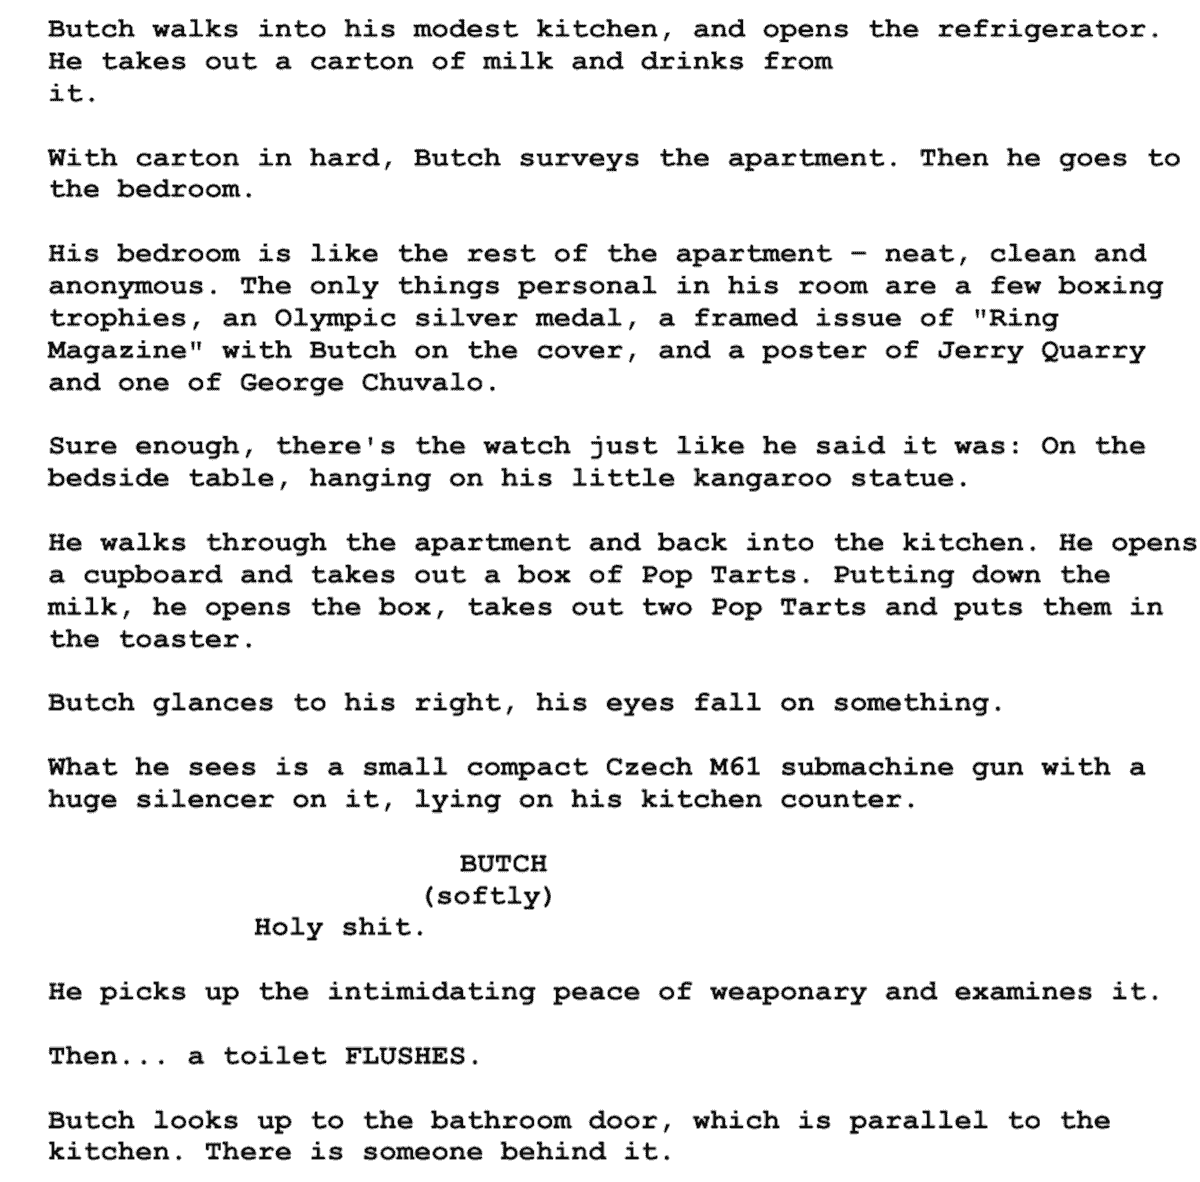 Screenplay Examples - Pulp Fiction Script - Screenplay Snippet 6 - Butch